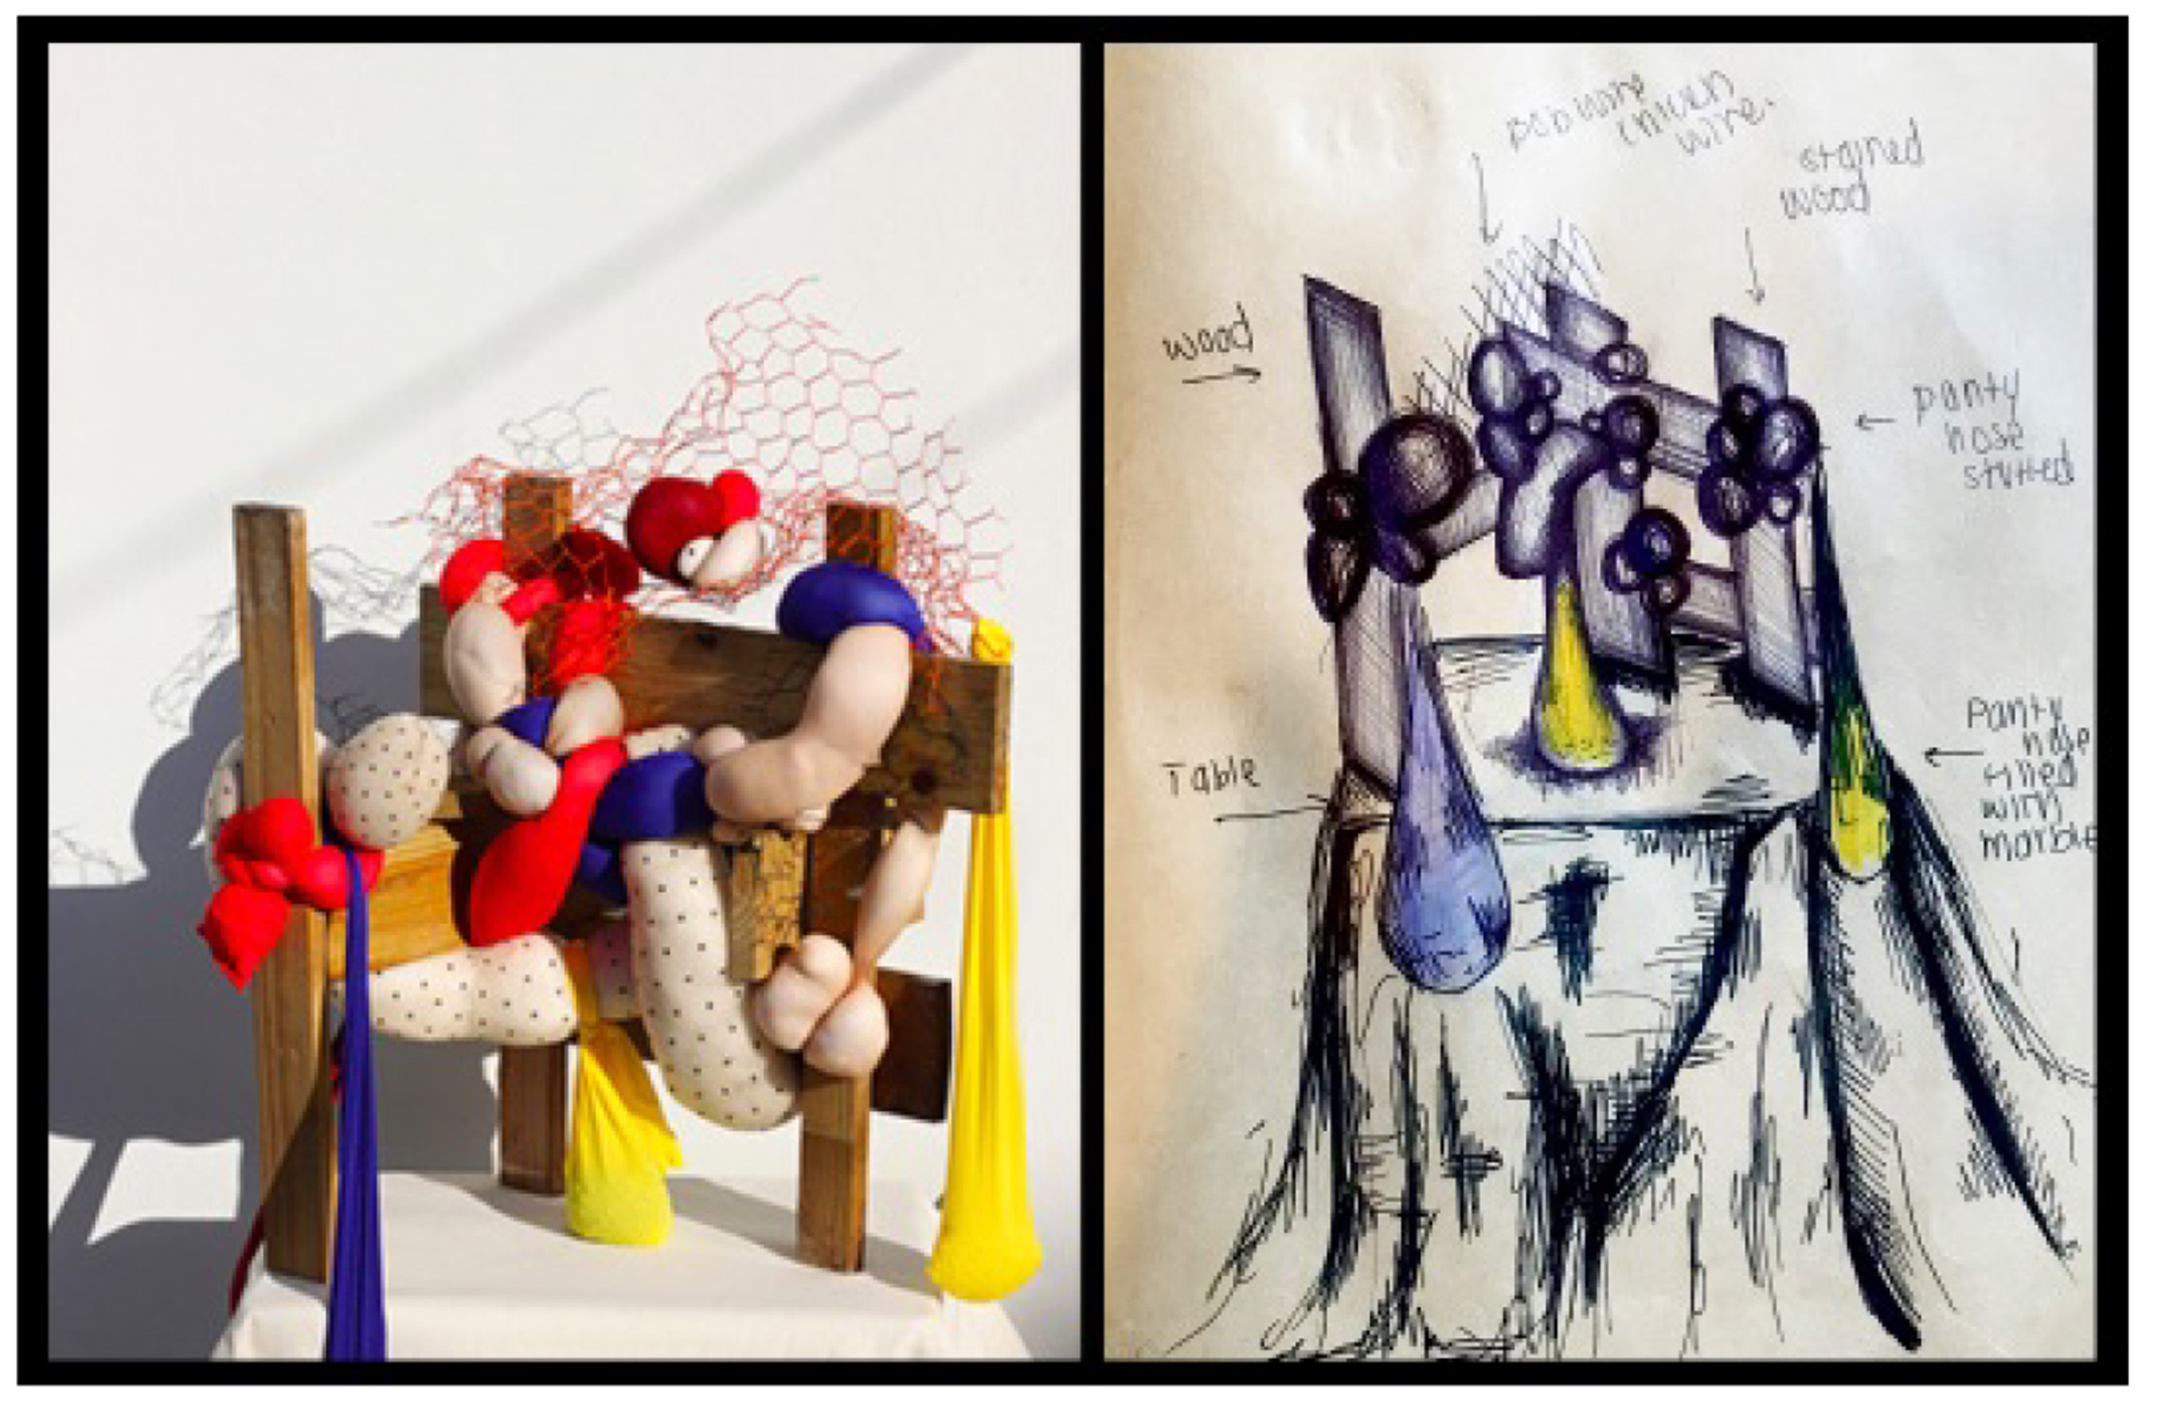 A mixed-media sculpture wrapping around a wood frame, on the left, and a sketch of the work on the right